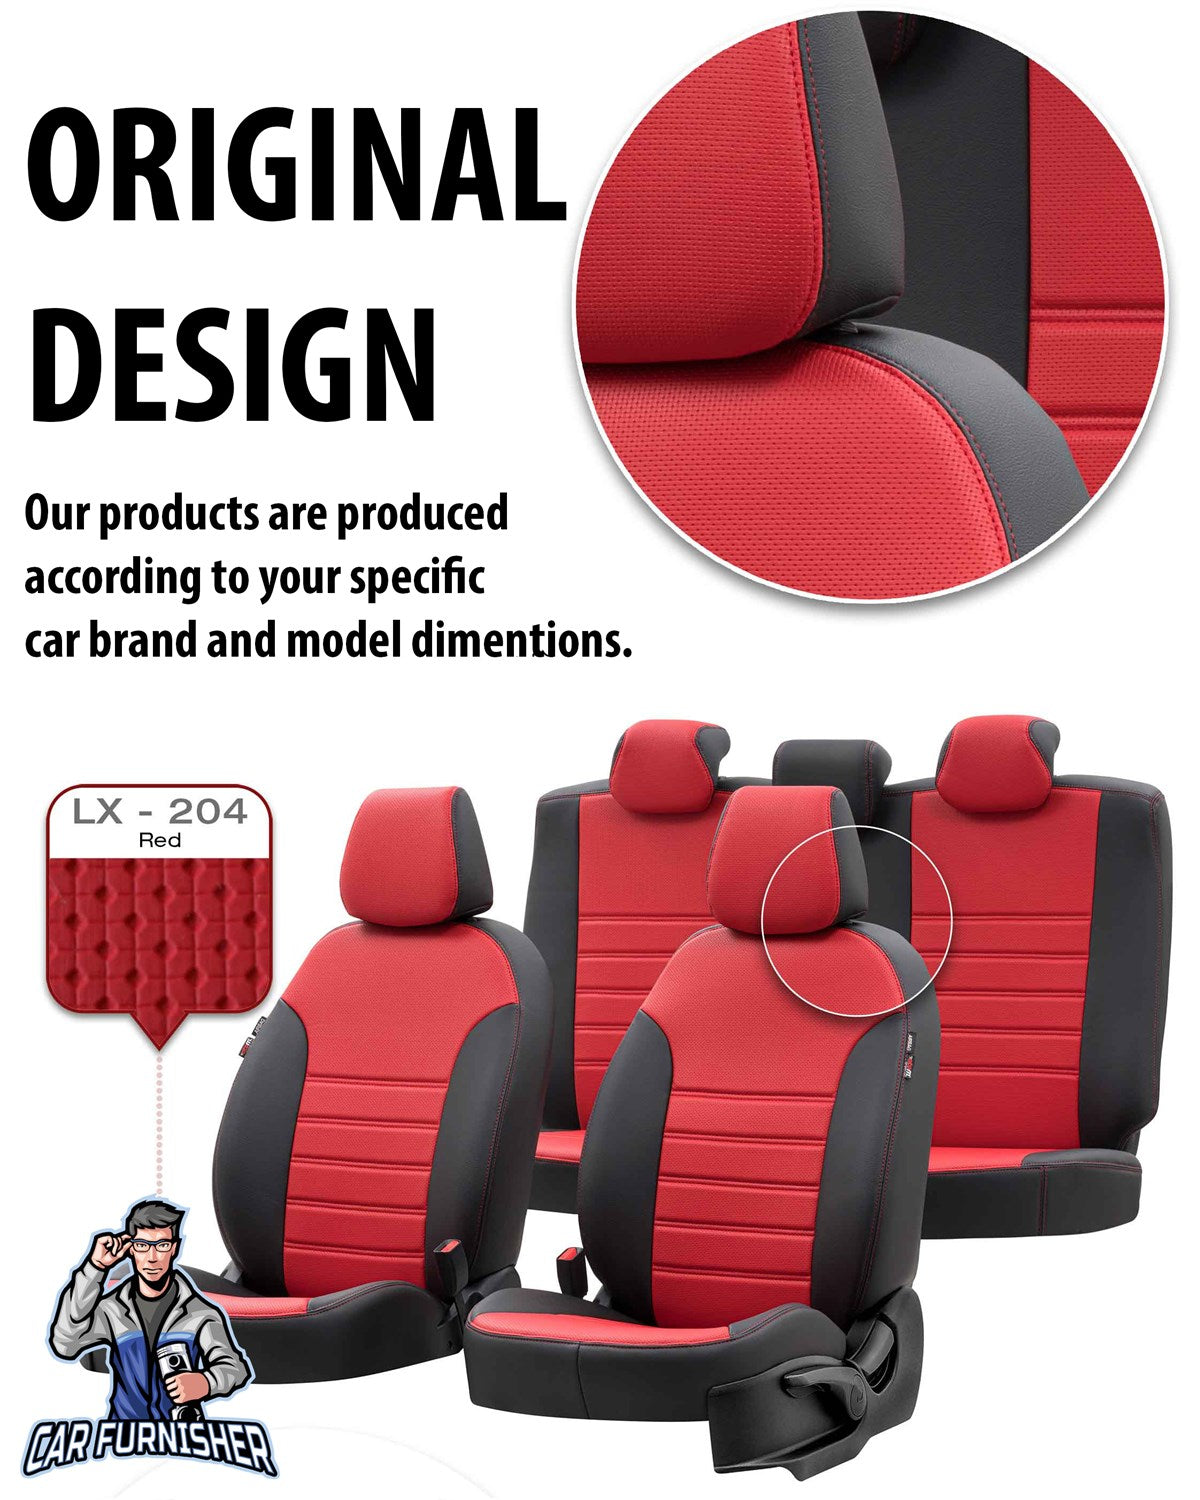 Fiat Panda Seat Covers New York Leather Design Beige Leather